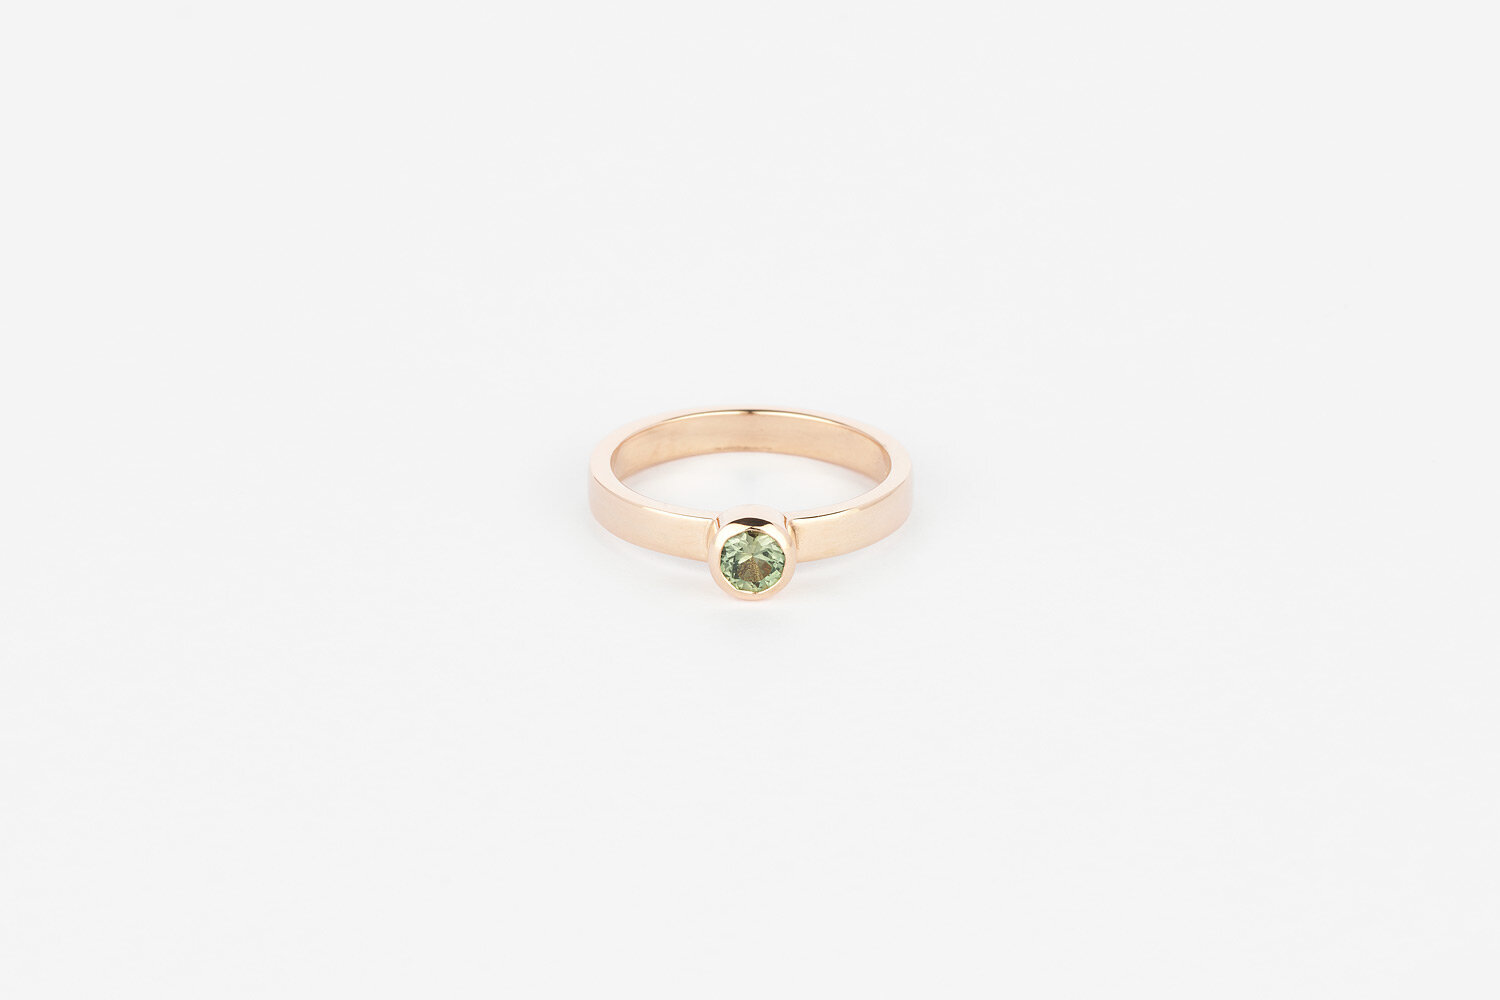  Fairtrade 9ct rose gold engagement ring, set with a green sapphire 